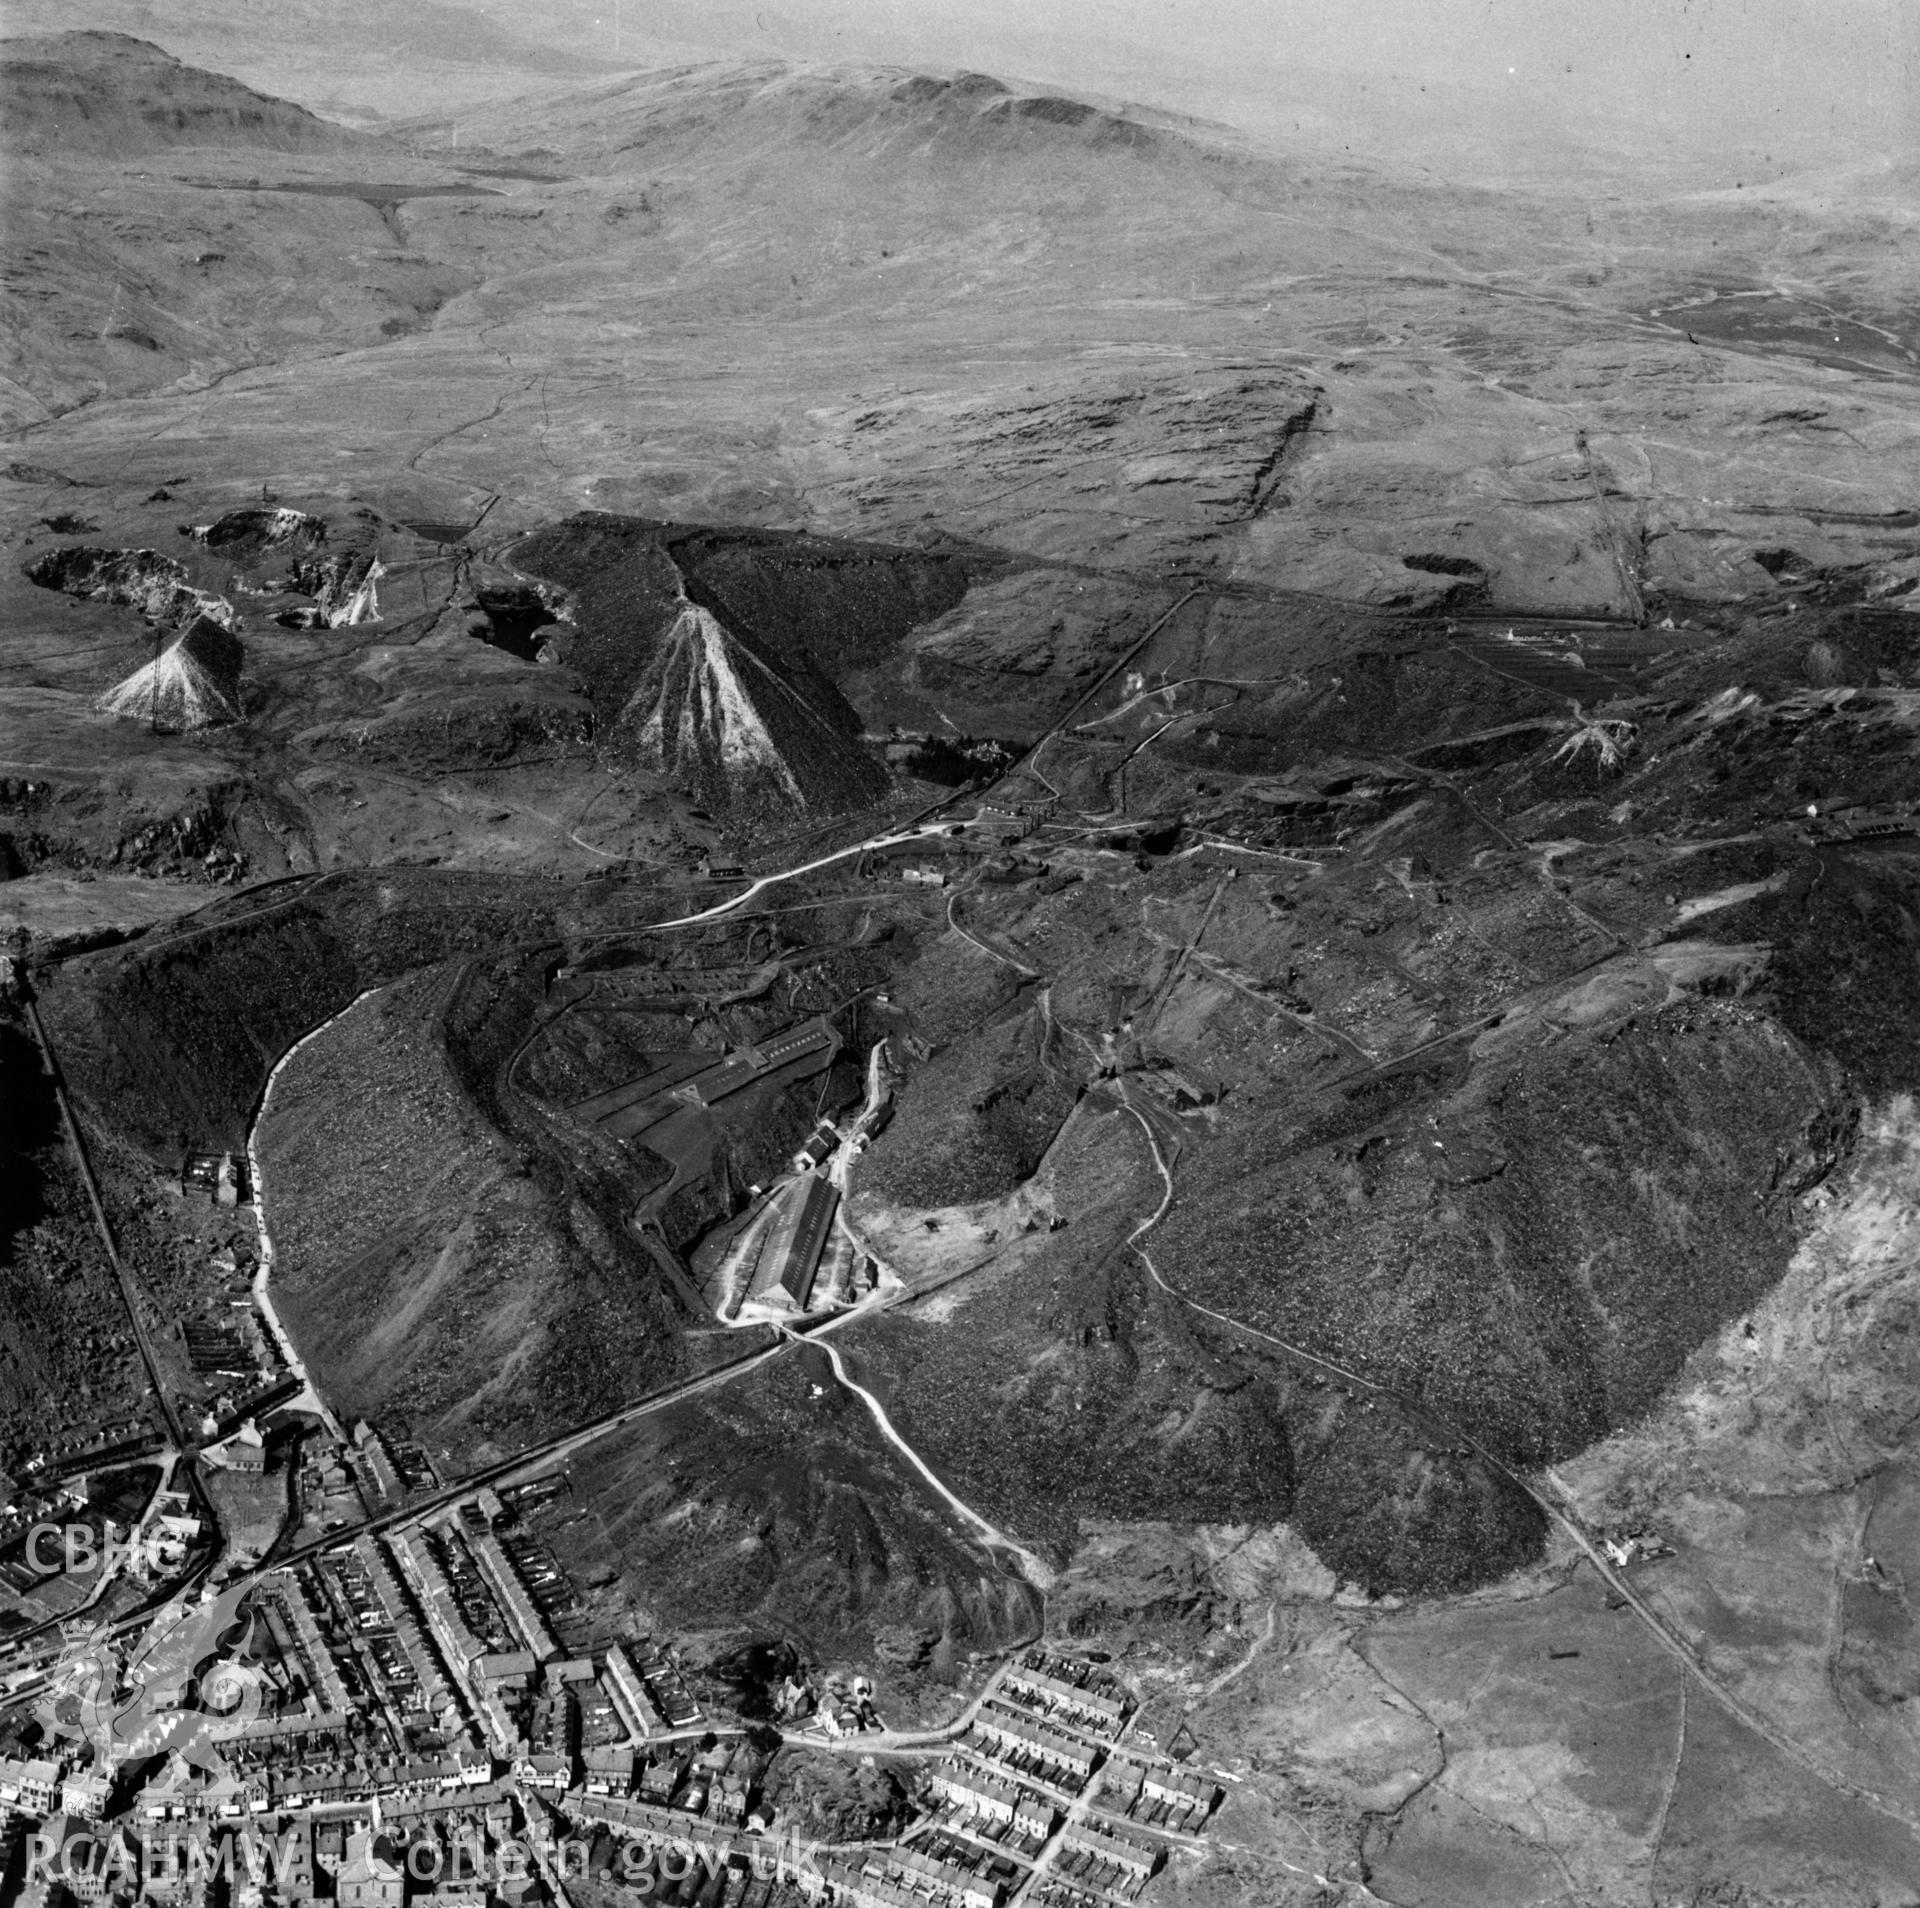 View of Fotty & Bowydd slate quarry showing Blaenau Ffestiniog in the foreground, commissioned by Oakley Slate quarries Co. Ltd.. Oblique aerial photograph, 5?" cut roll film.